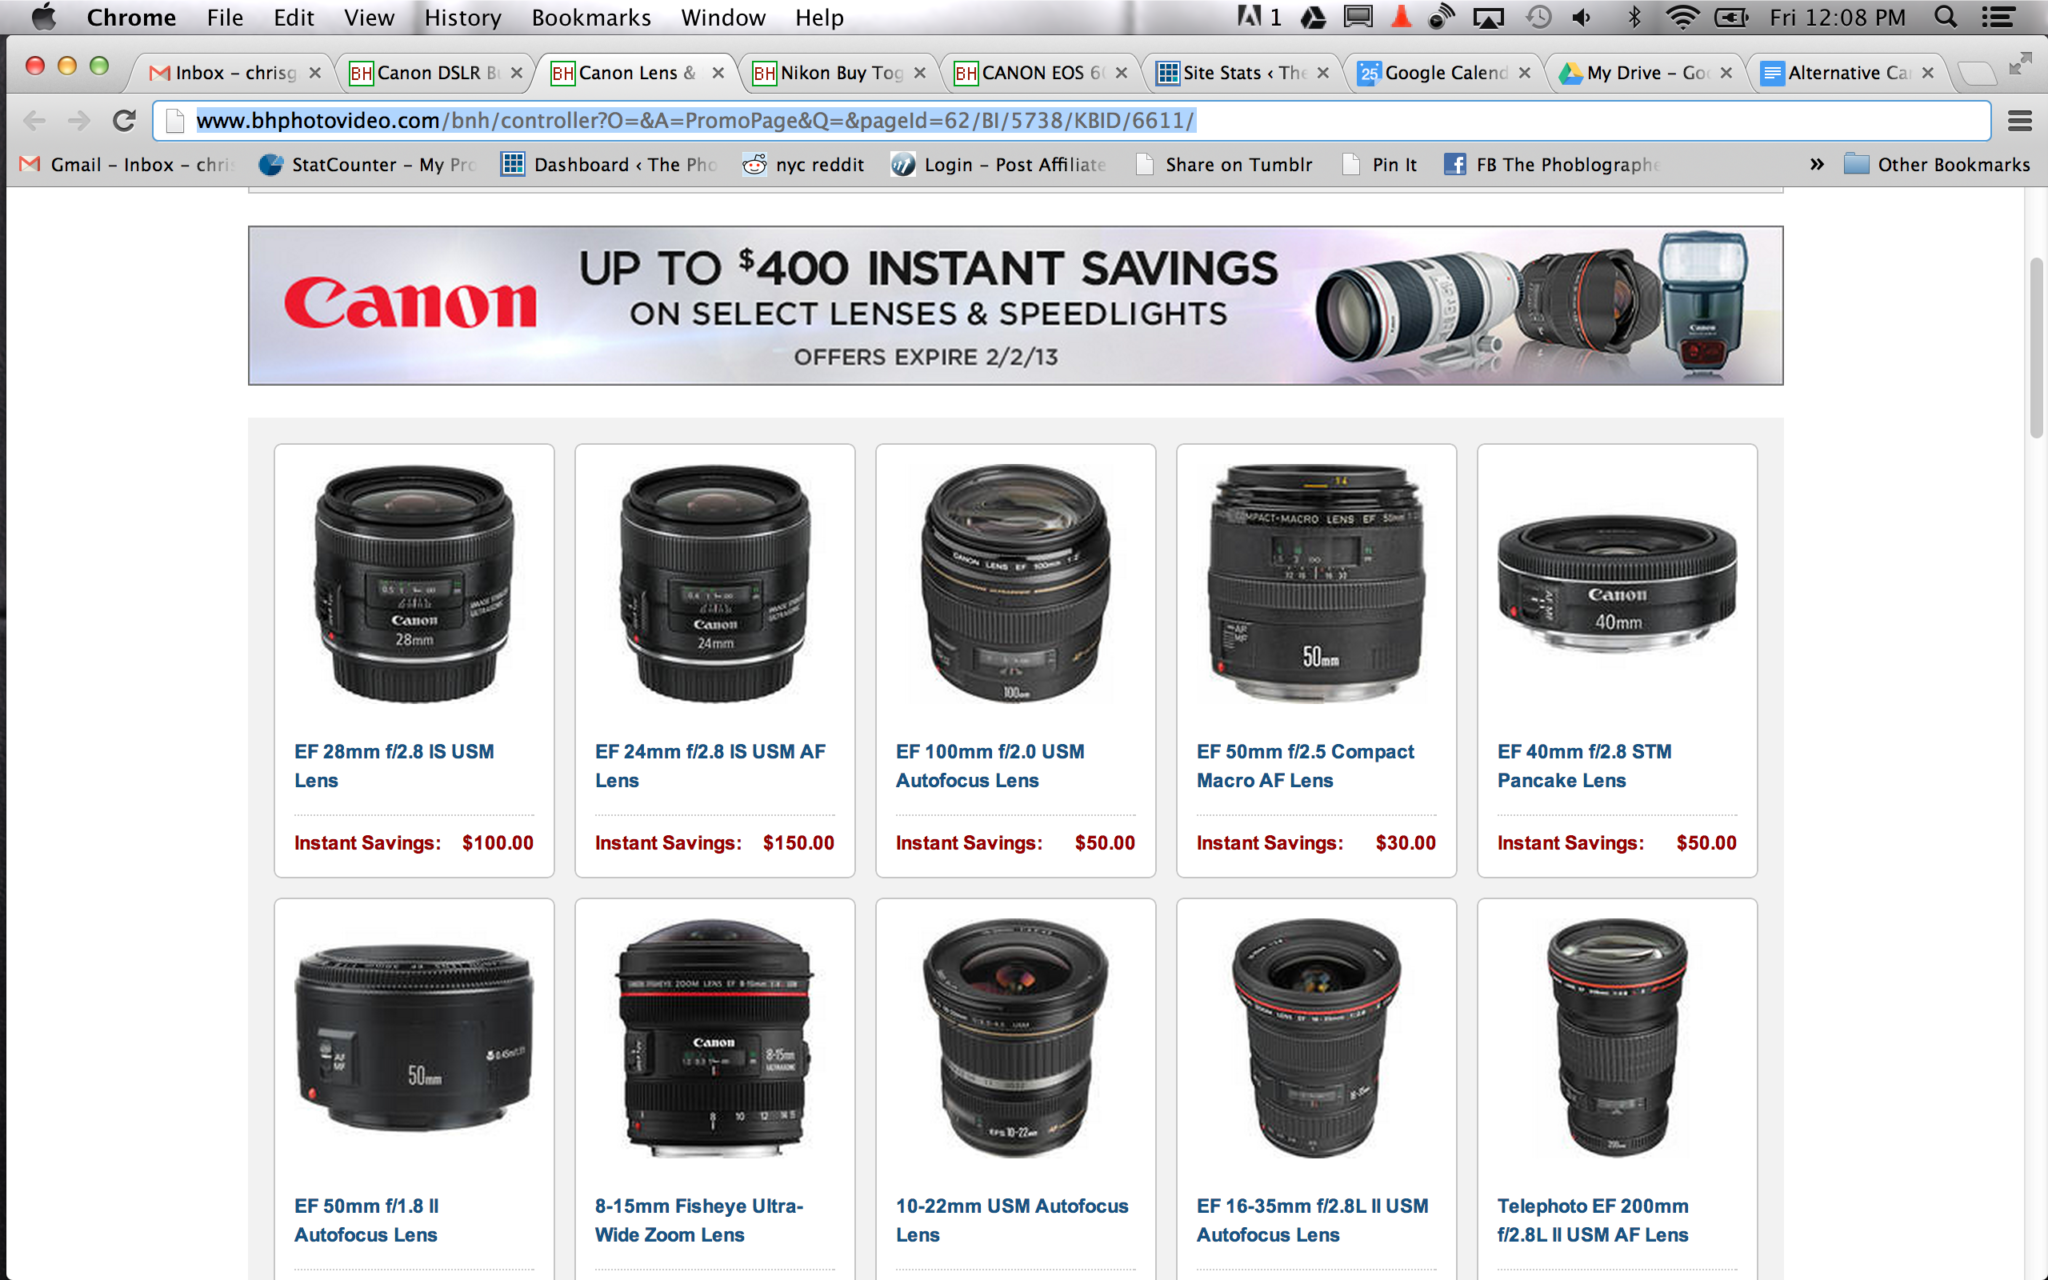 Cheap Photo: Savings on Canon and Nikon Gear That You’ll Drool Over